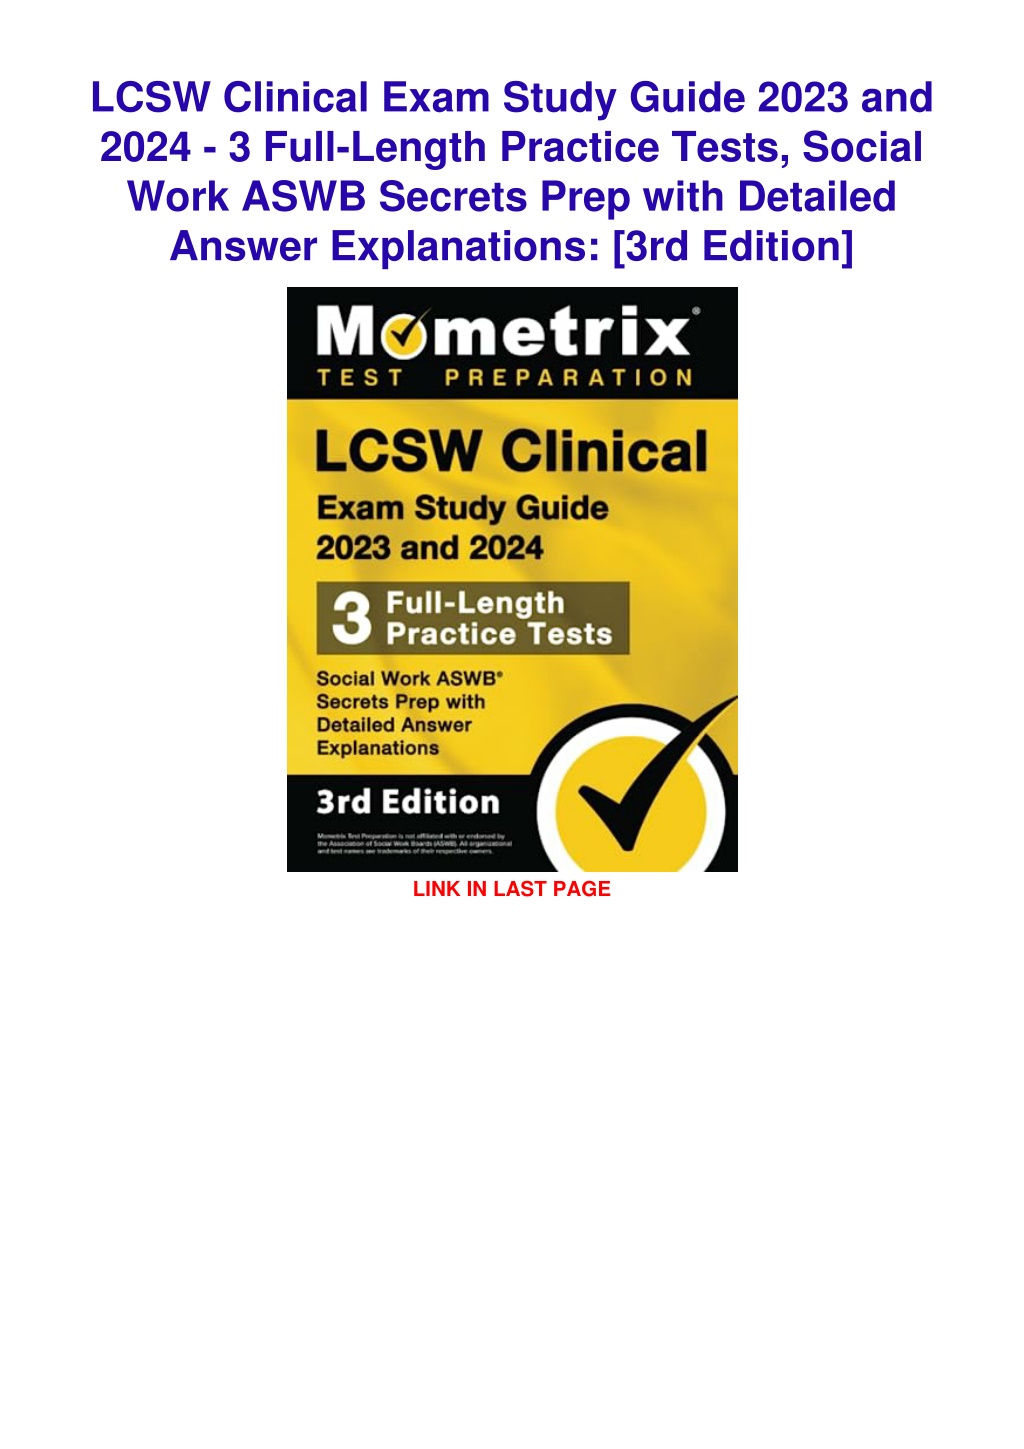 PPT [PDF READ ONLINE] LCSW Clinical Exam Study Guide 2023 and 2024